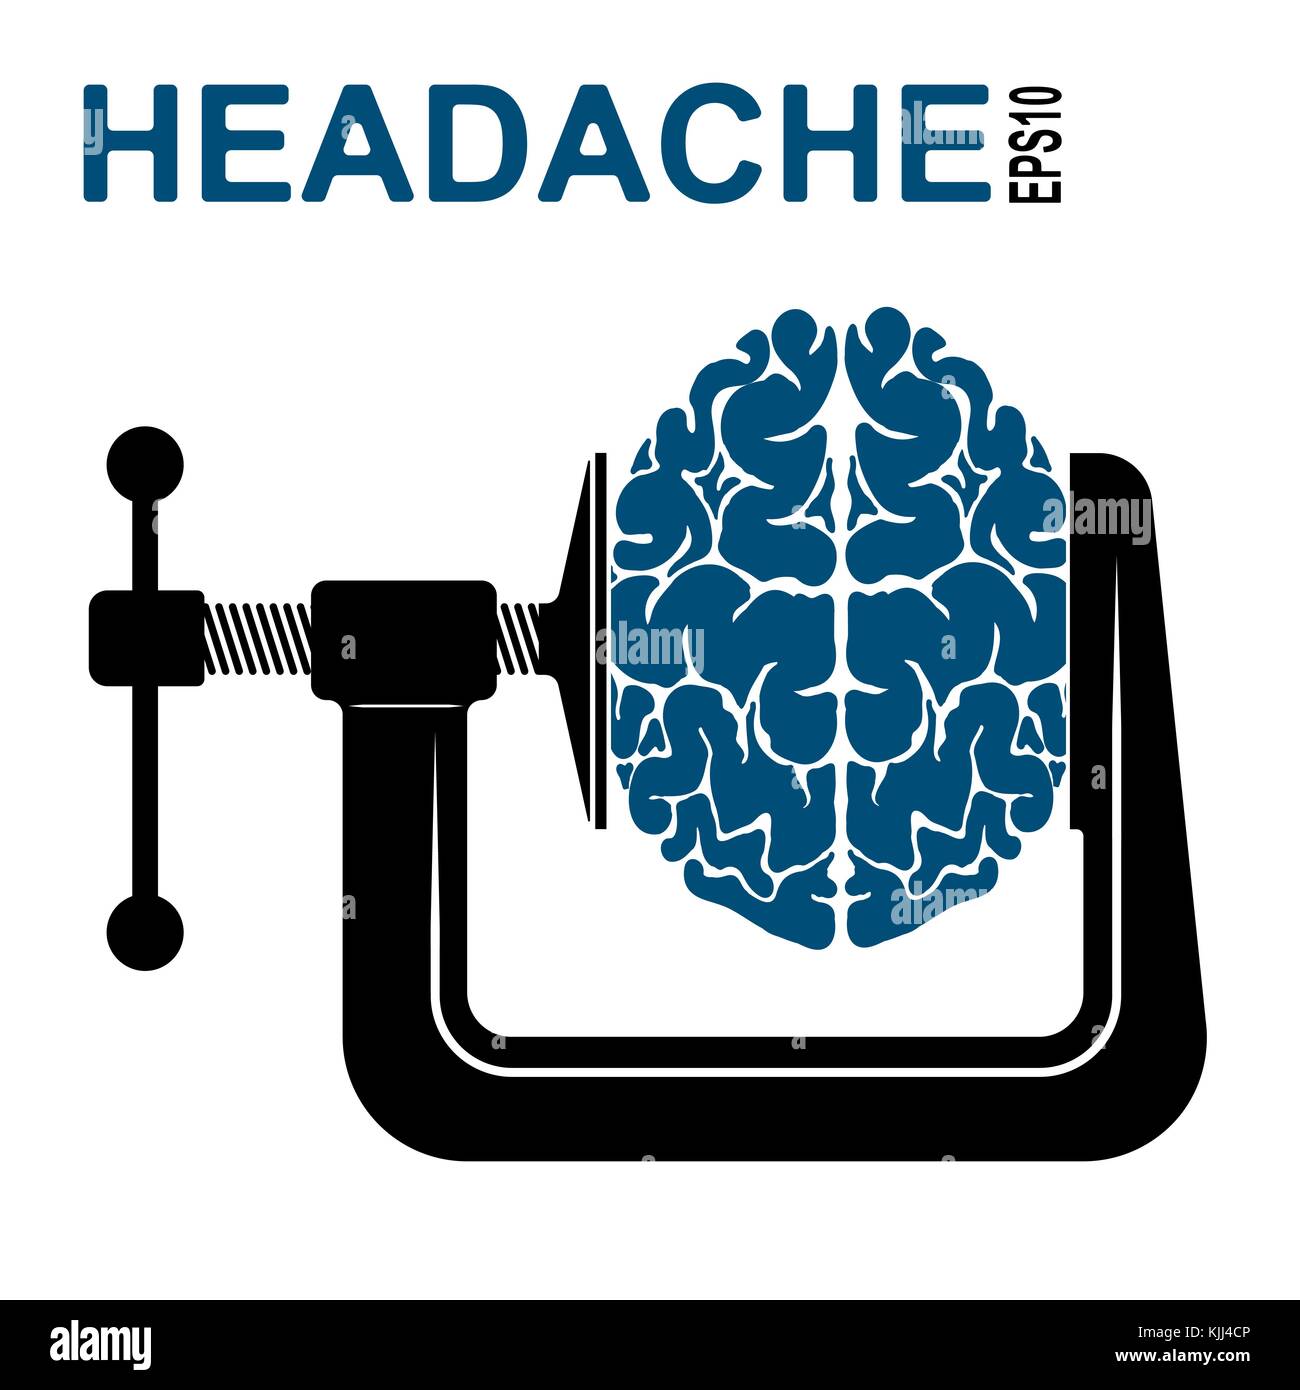 Logo or icon about a headache. Pressure on the brain. Oppression of man. Stock Vector